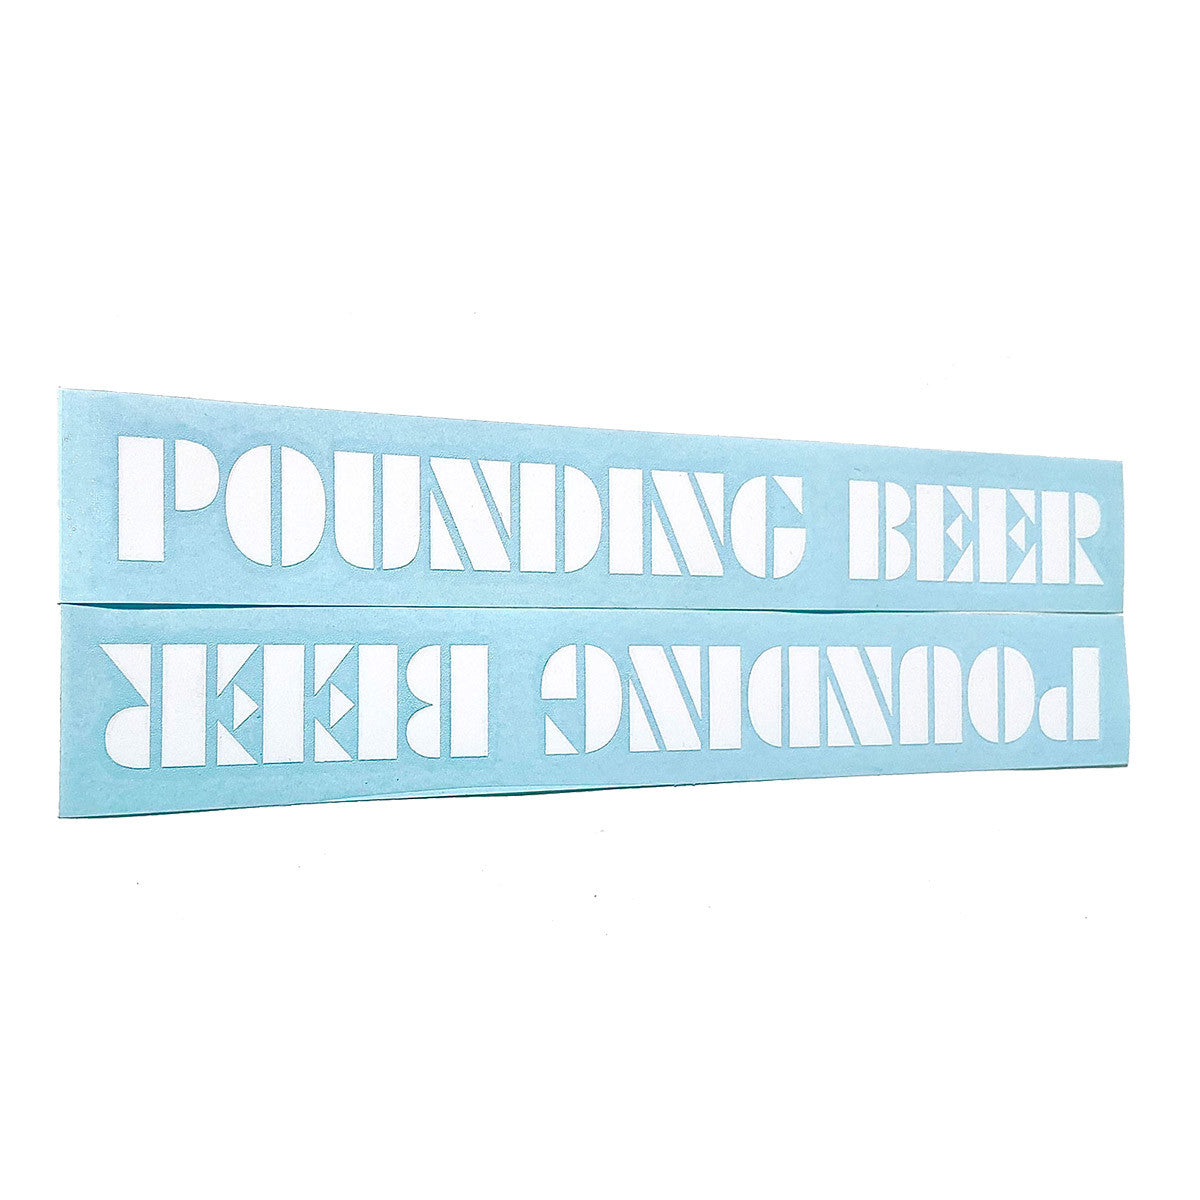 S&M BMX "POUNDING BEER" Decals - White